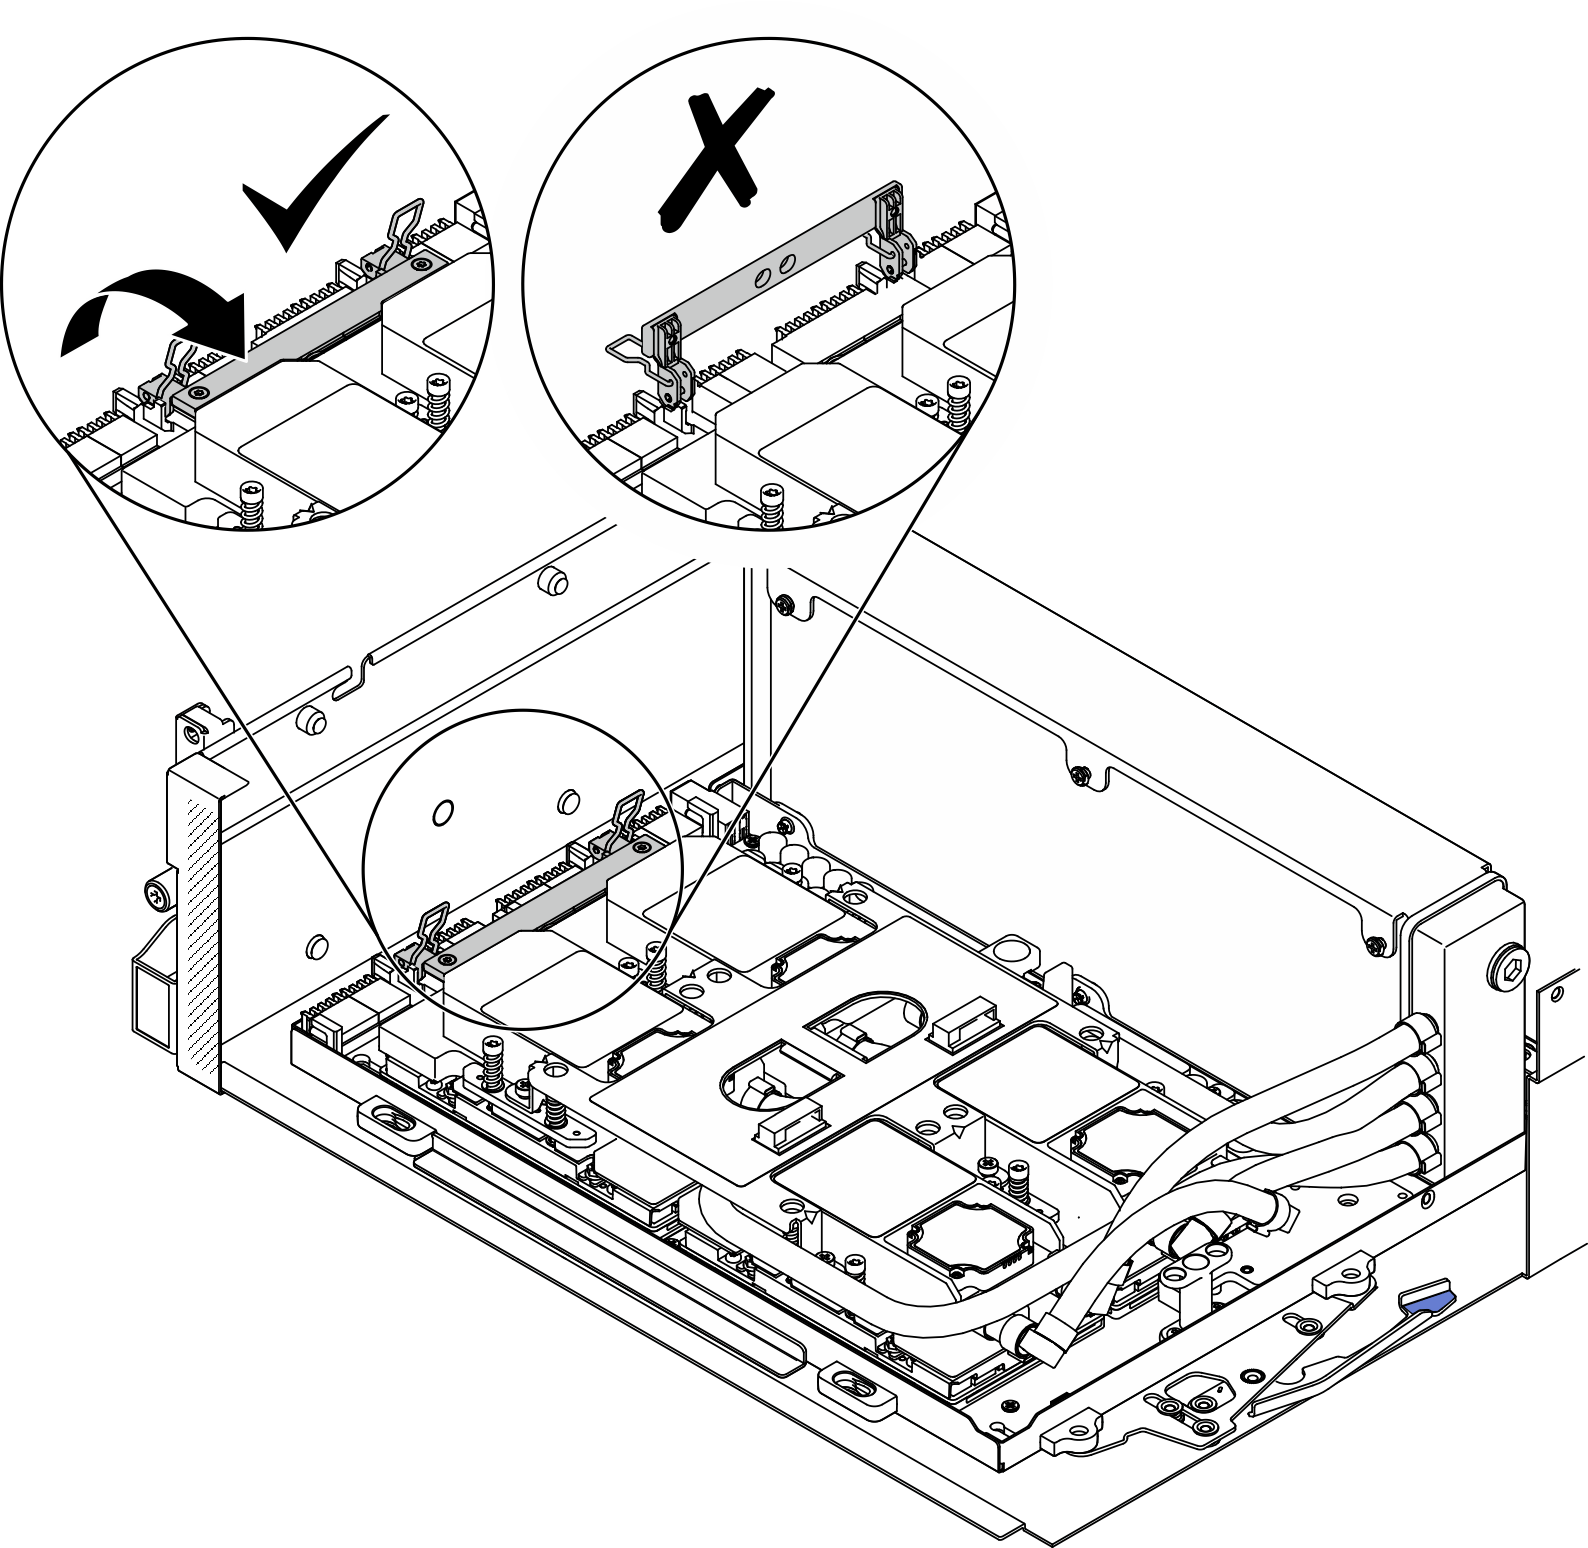 Adjusting the GPU-L2A assembly position